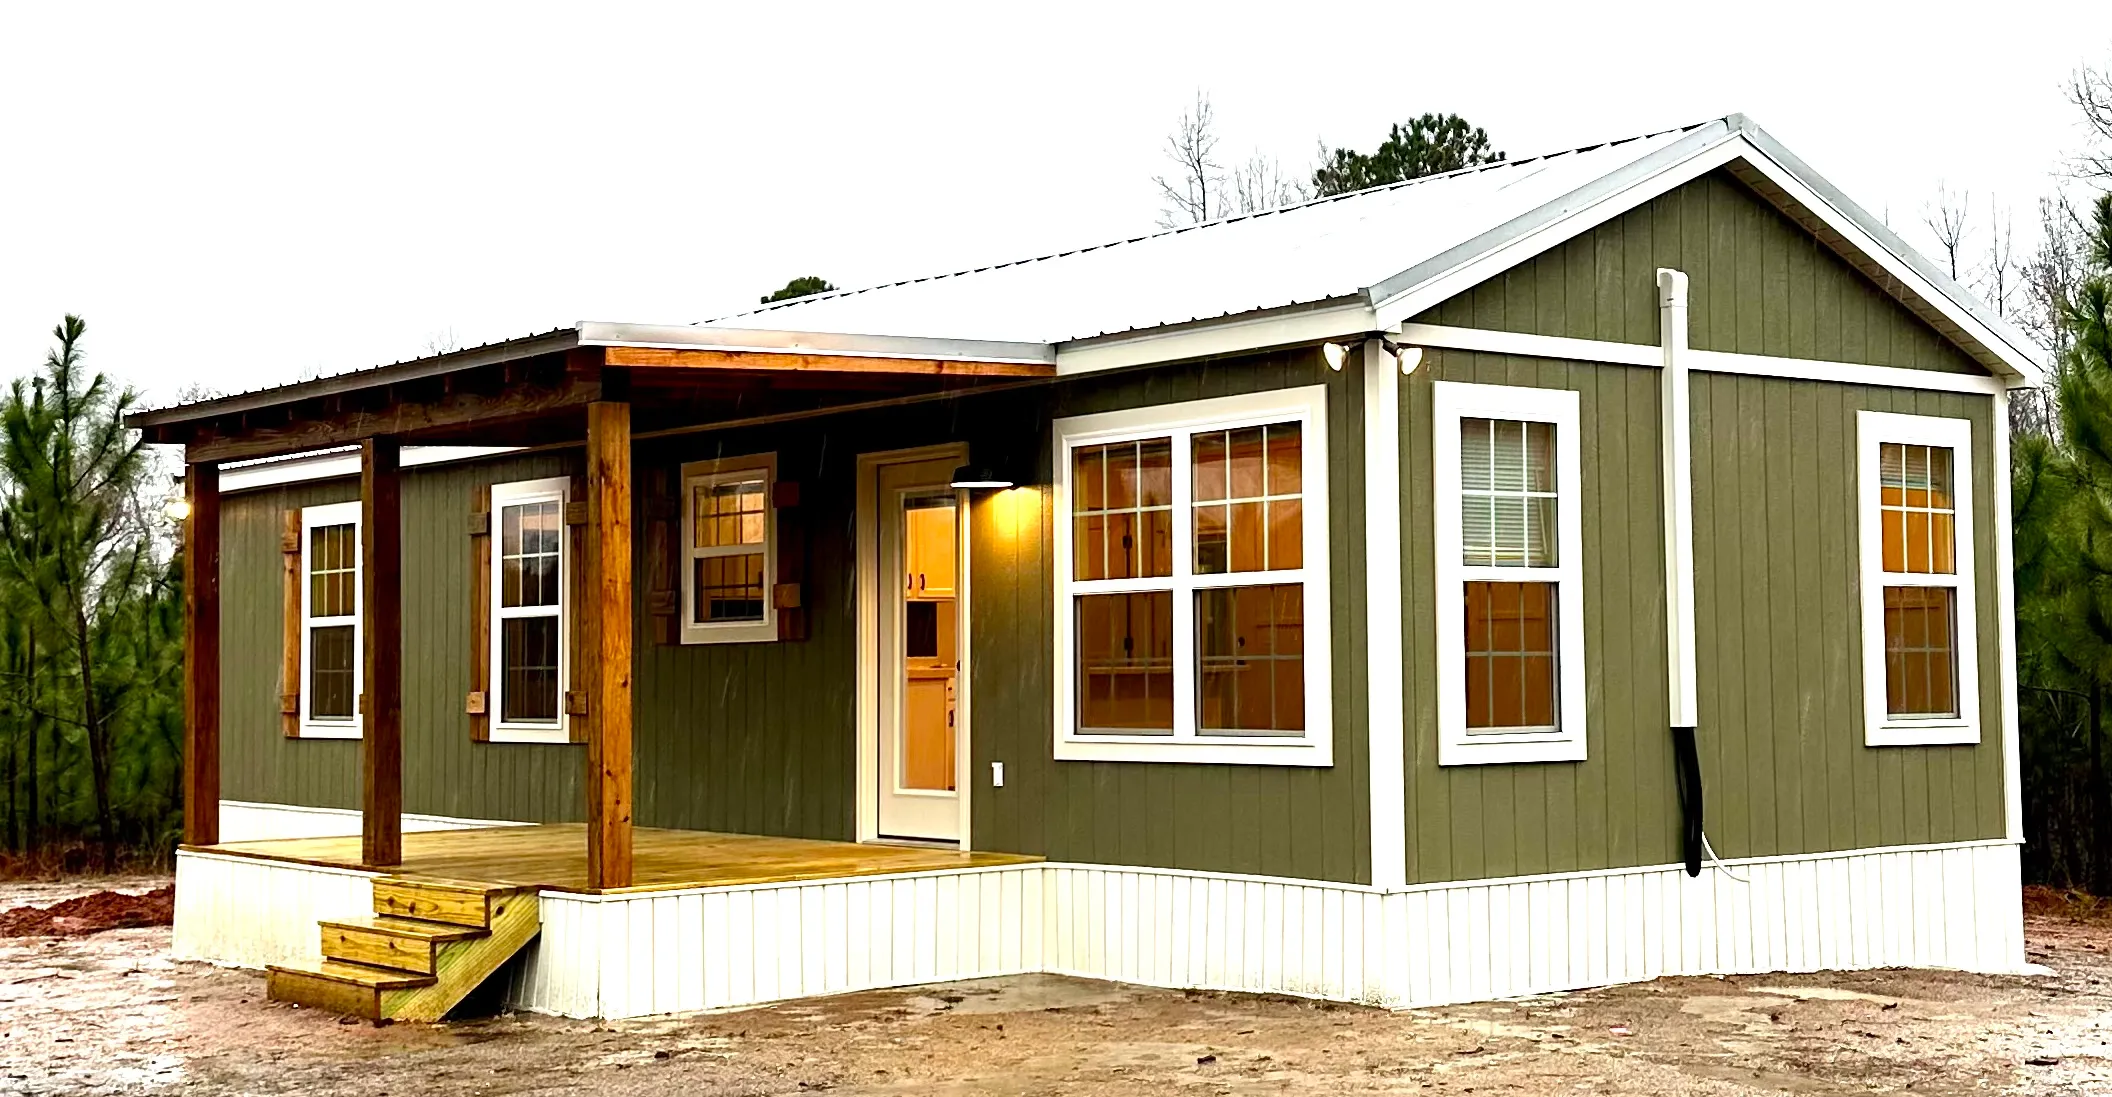 Custom Tiny Homes  for Mustard Seed Mansions  in Georgia, GA